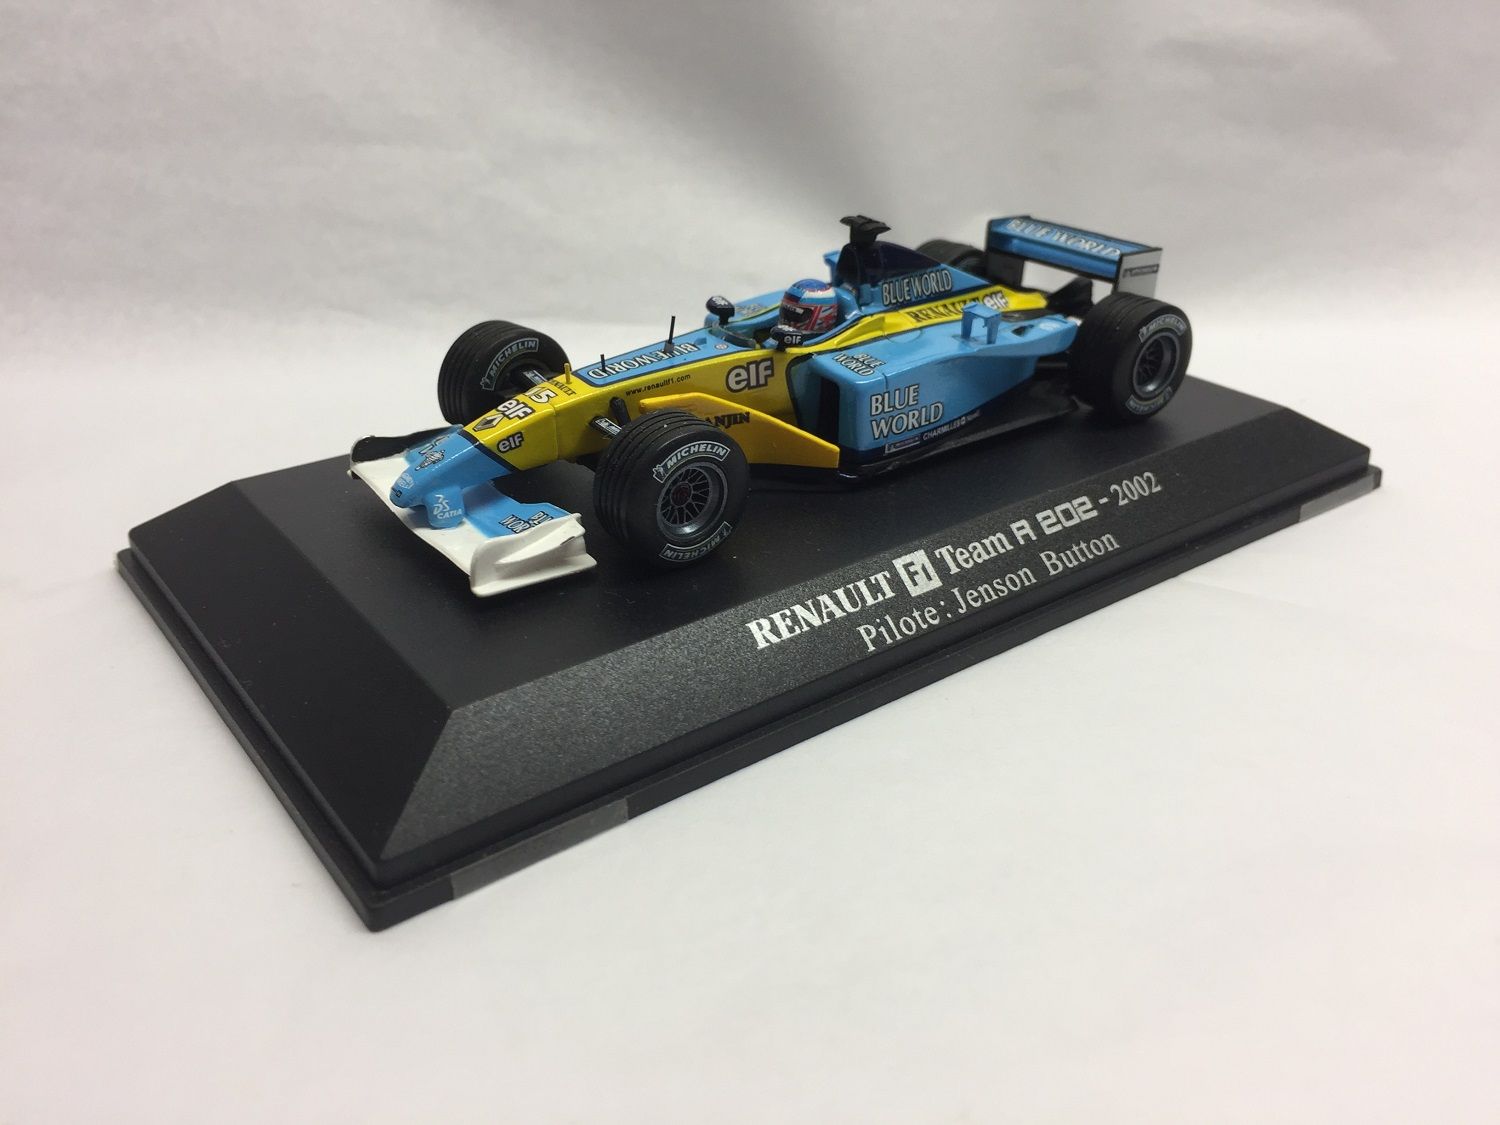 METROPOLE Collection - RENAULT F1 Team A 202 - 2002 - 1/43 - 3MJA